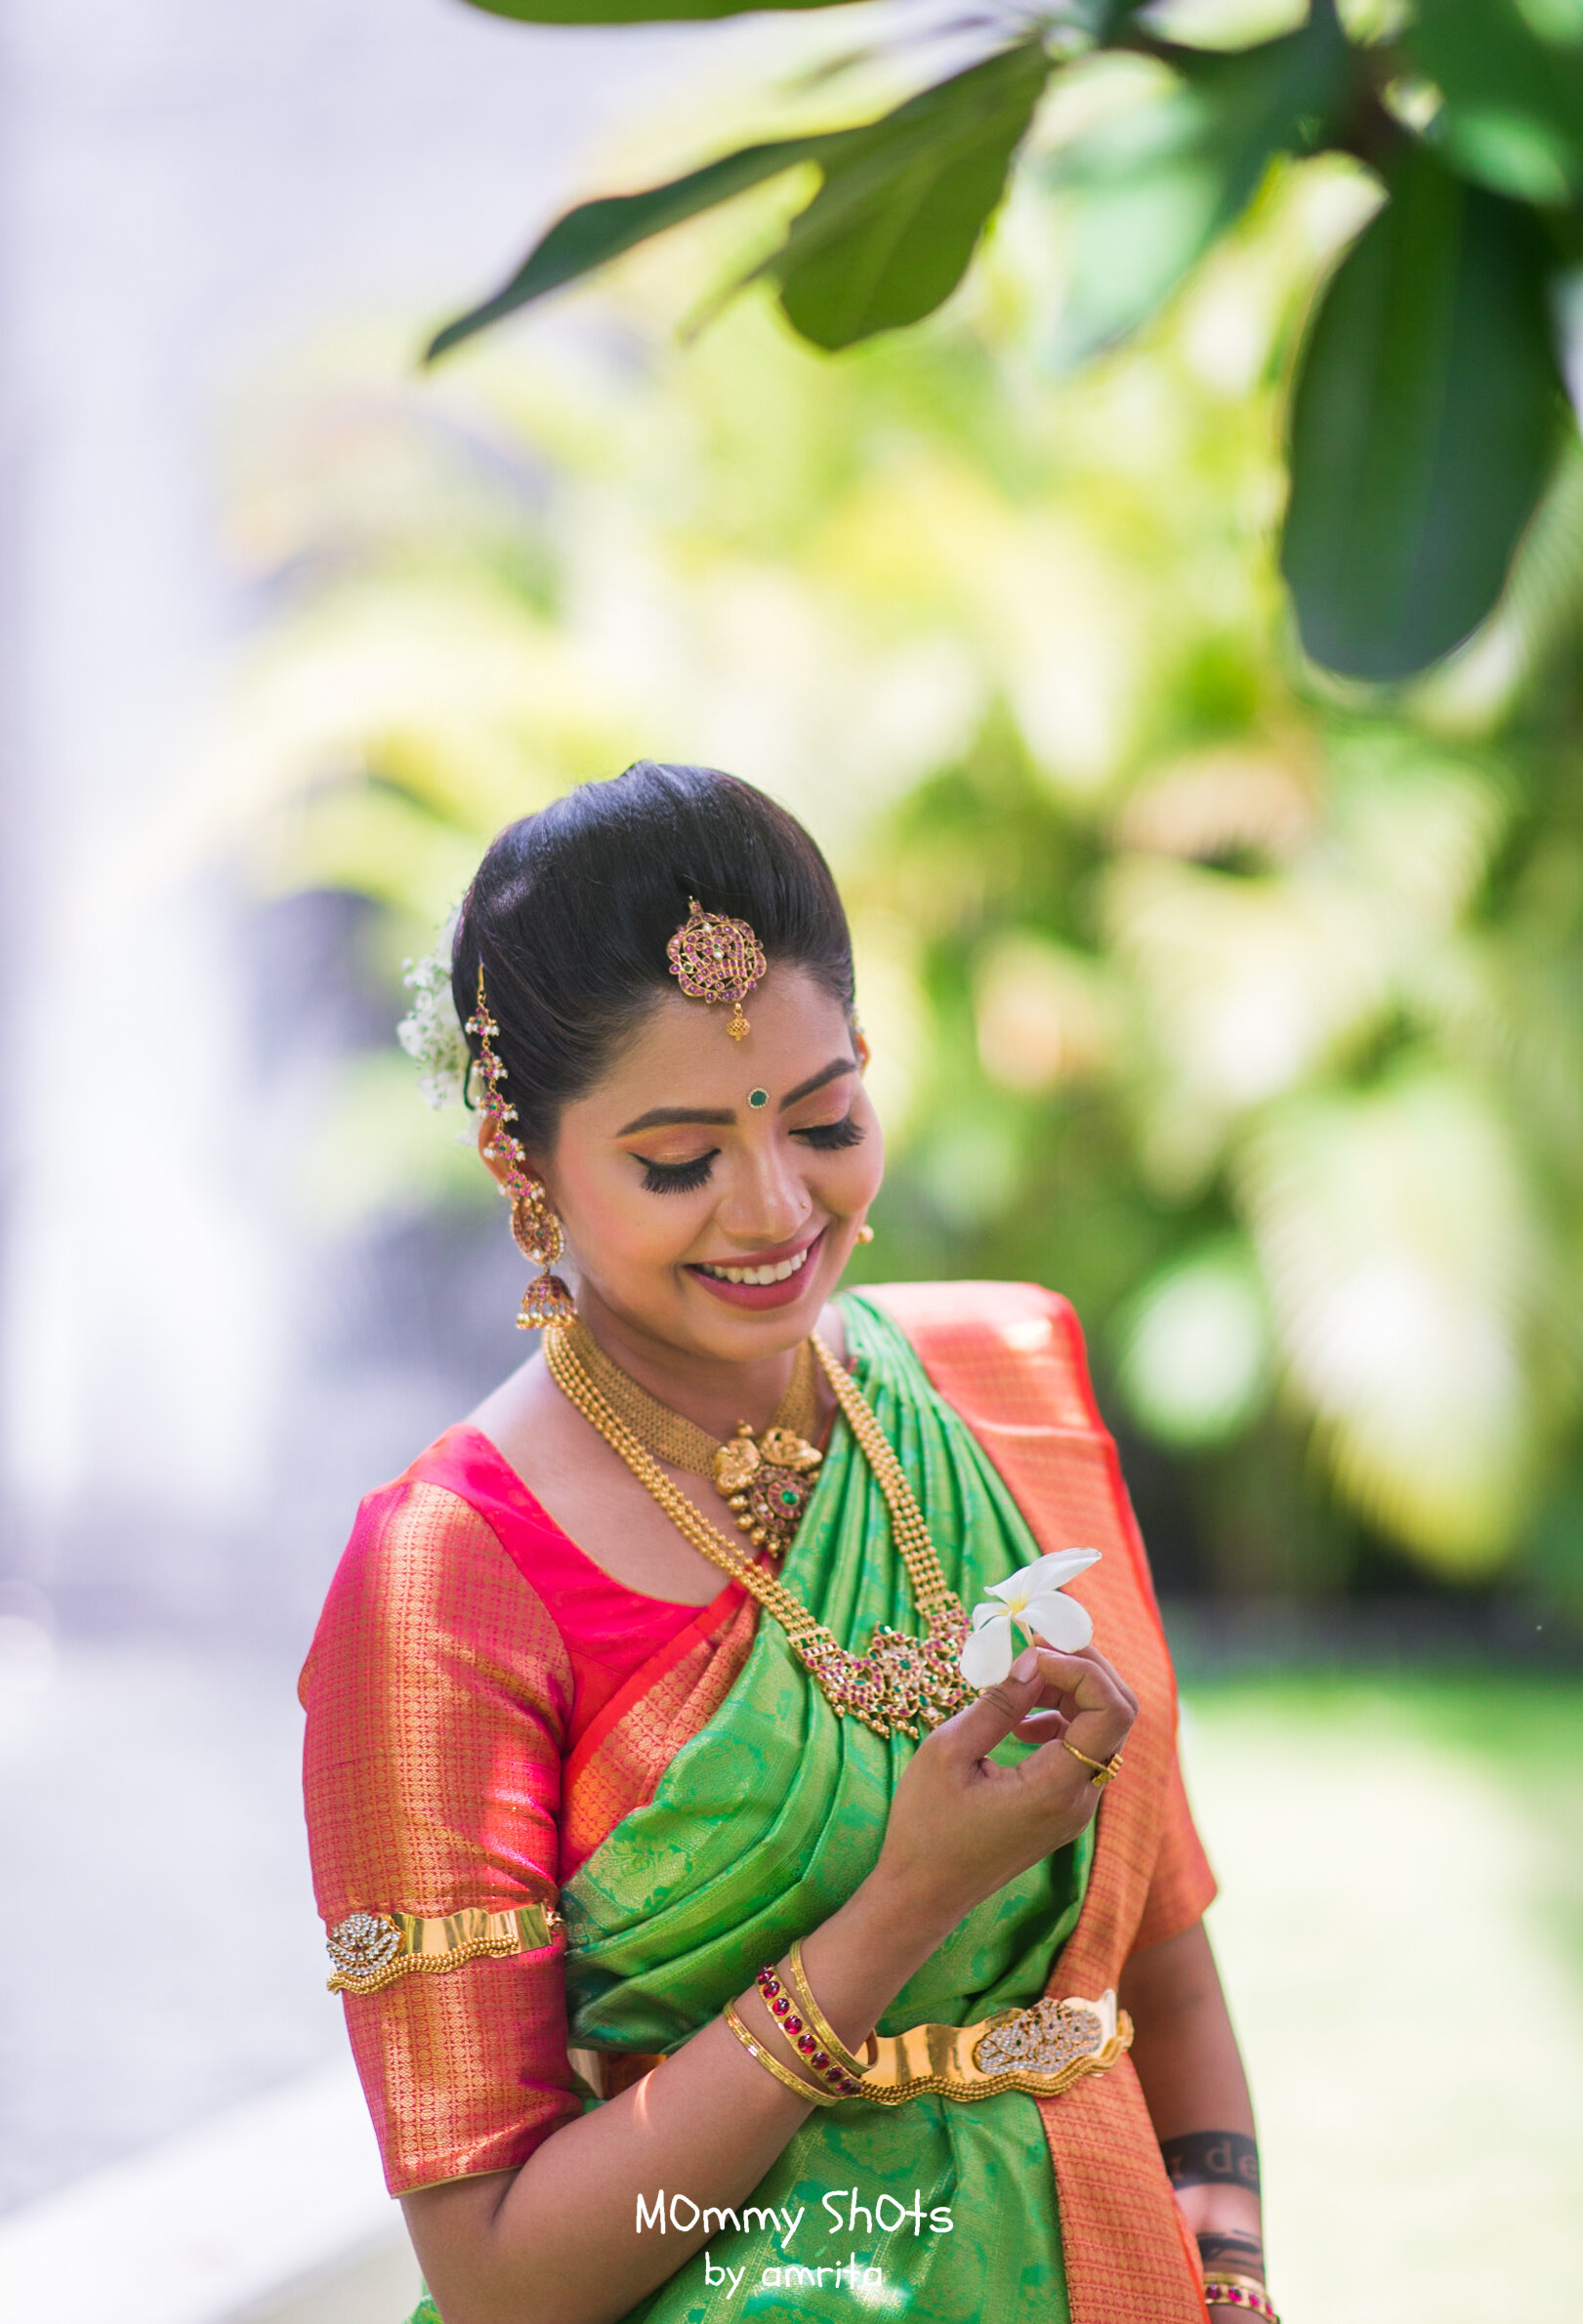 Trending: Paithani Sarees For Your Muhurtham | Maternity photography poses  couple, Maternity photography poses pregnancy pics, Baby shower photography